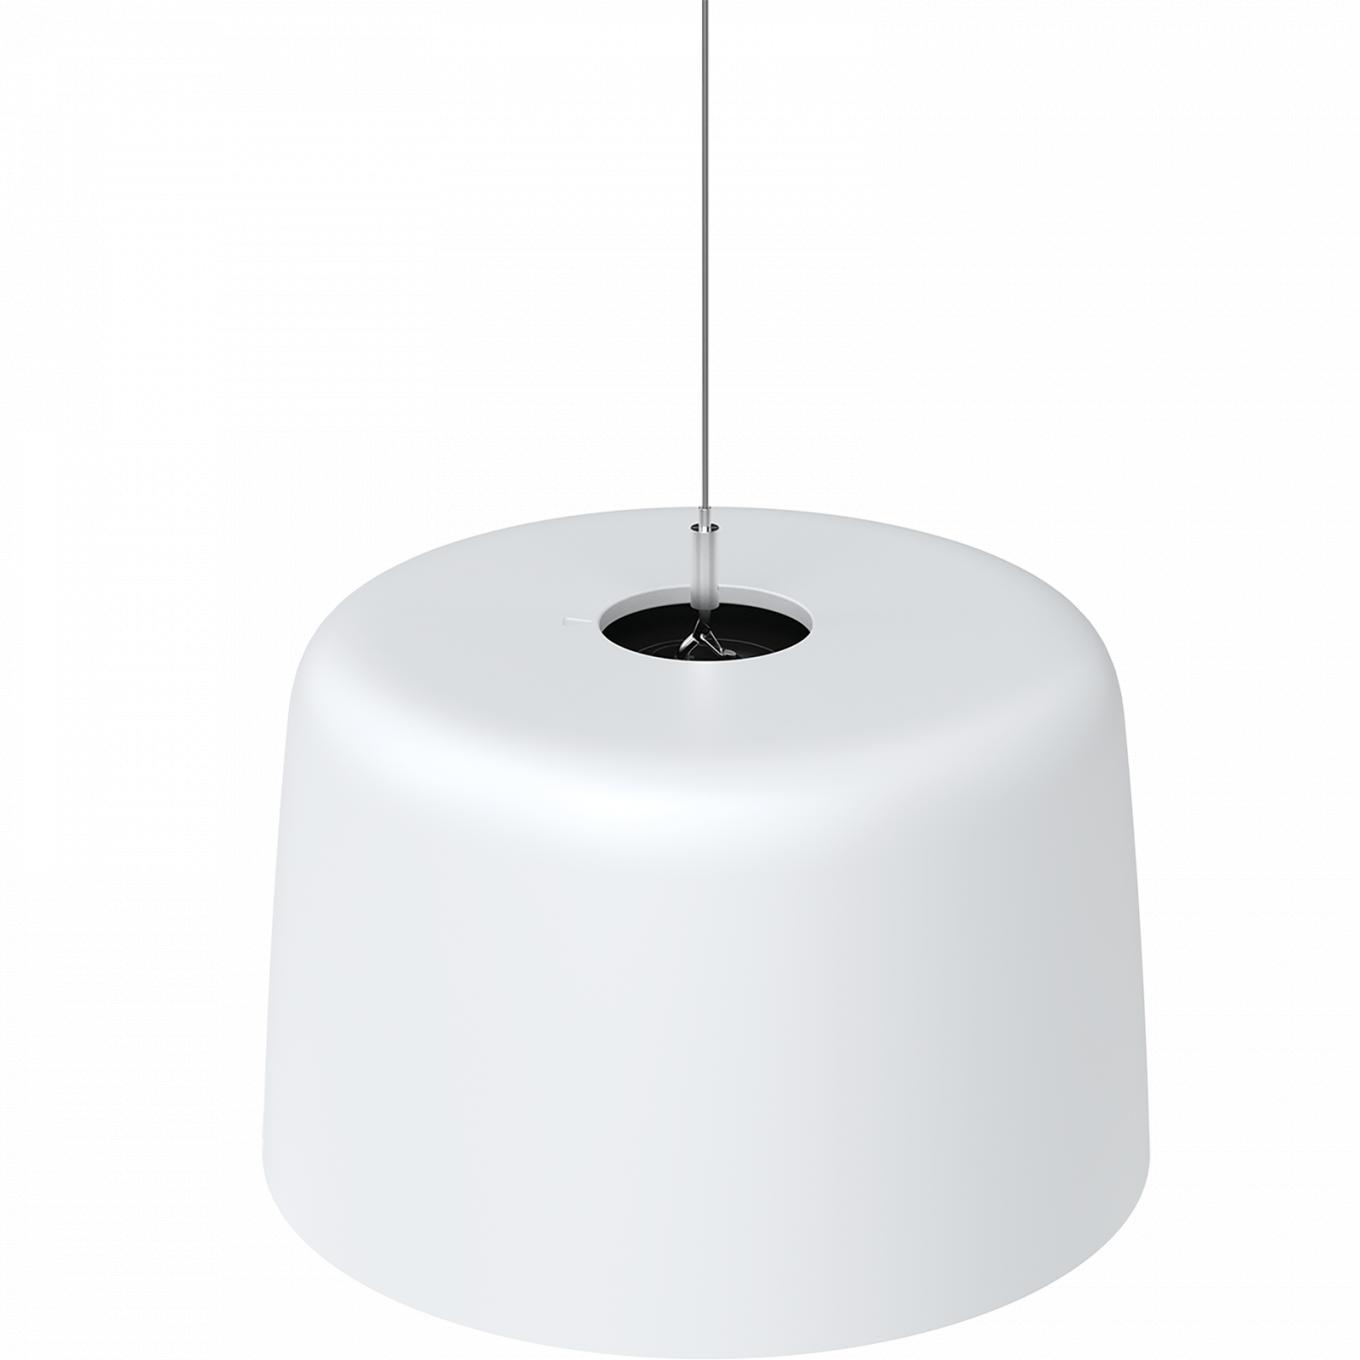 AXIS C1510 Network Pendant Speaker, mounted in the ceiling, viewed from the above